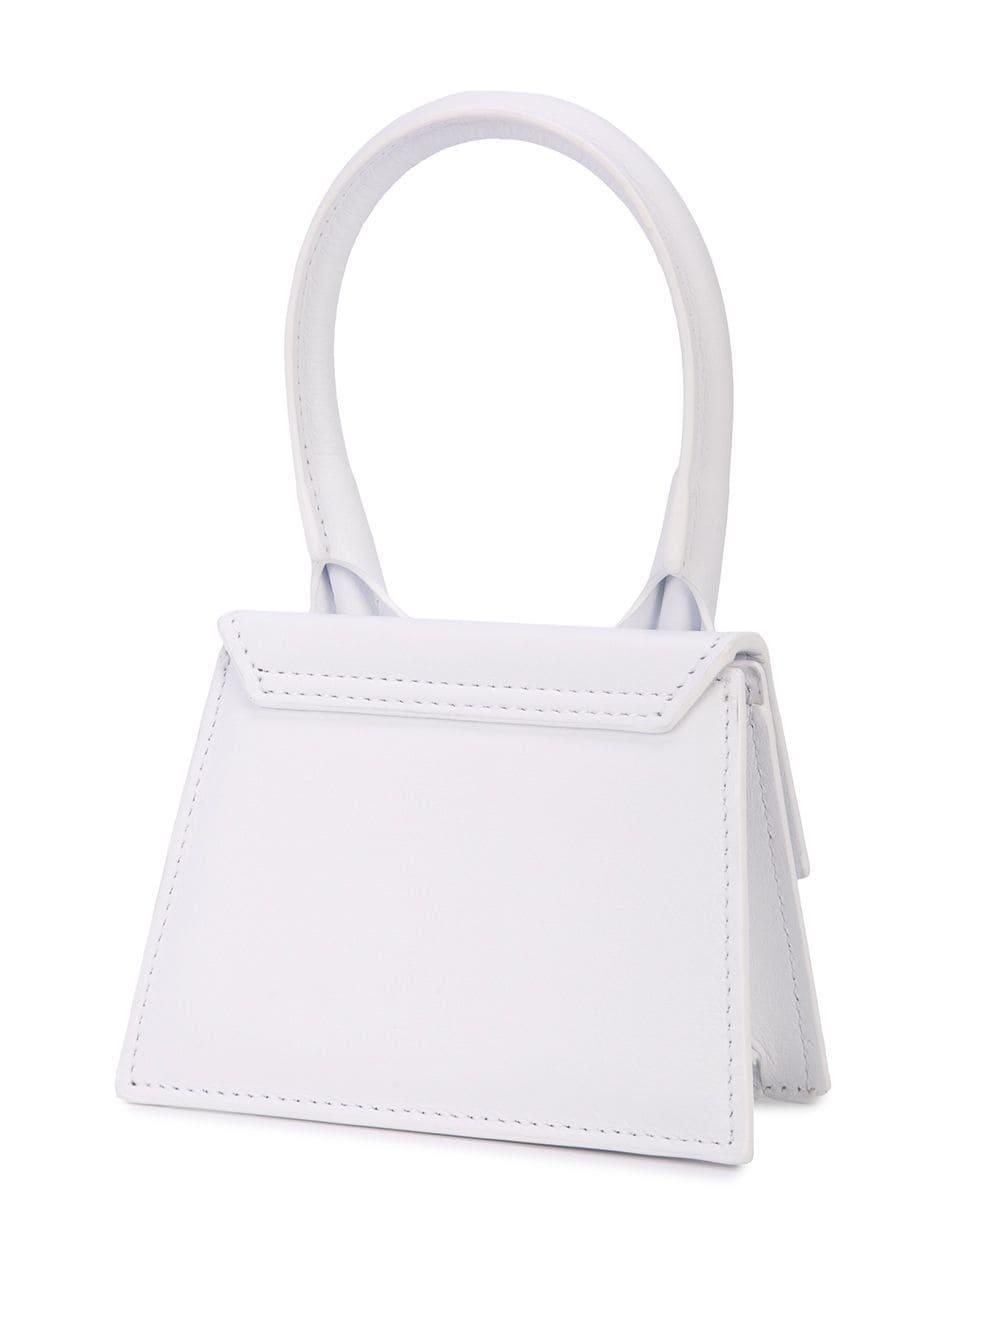 Jacquemus Le Chiquito Bag in White - Lyst